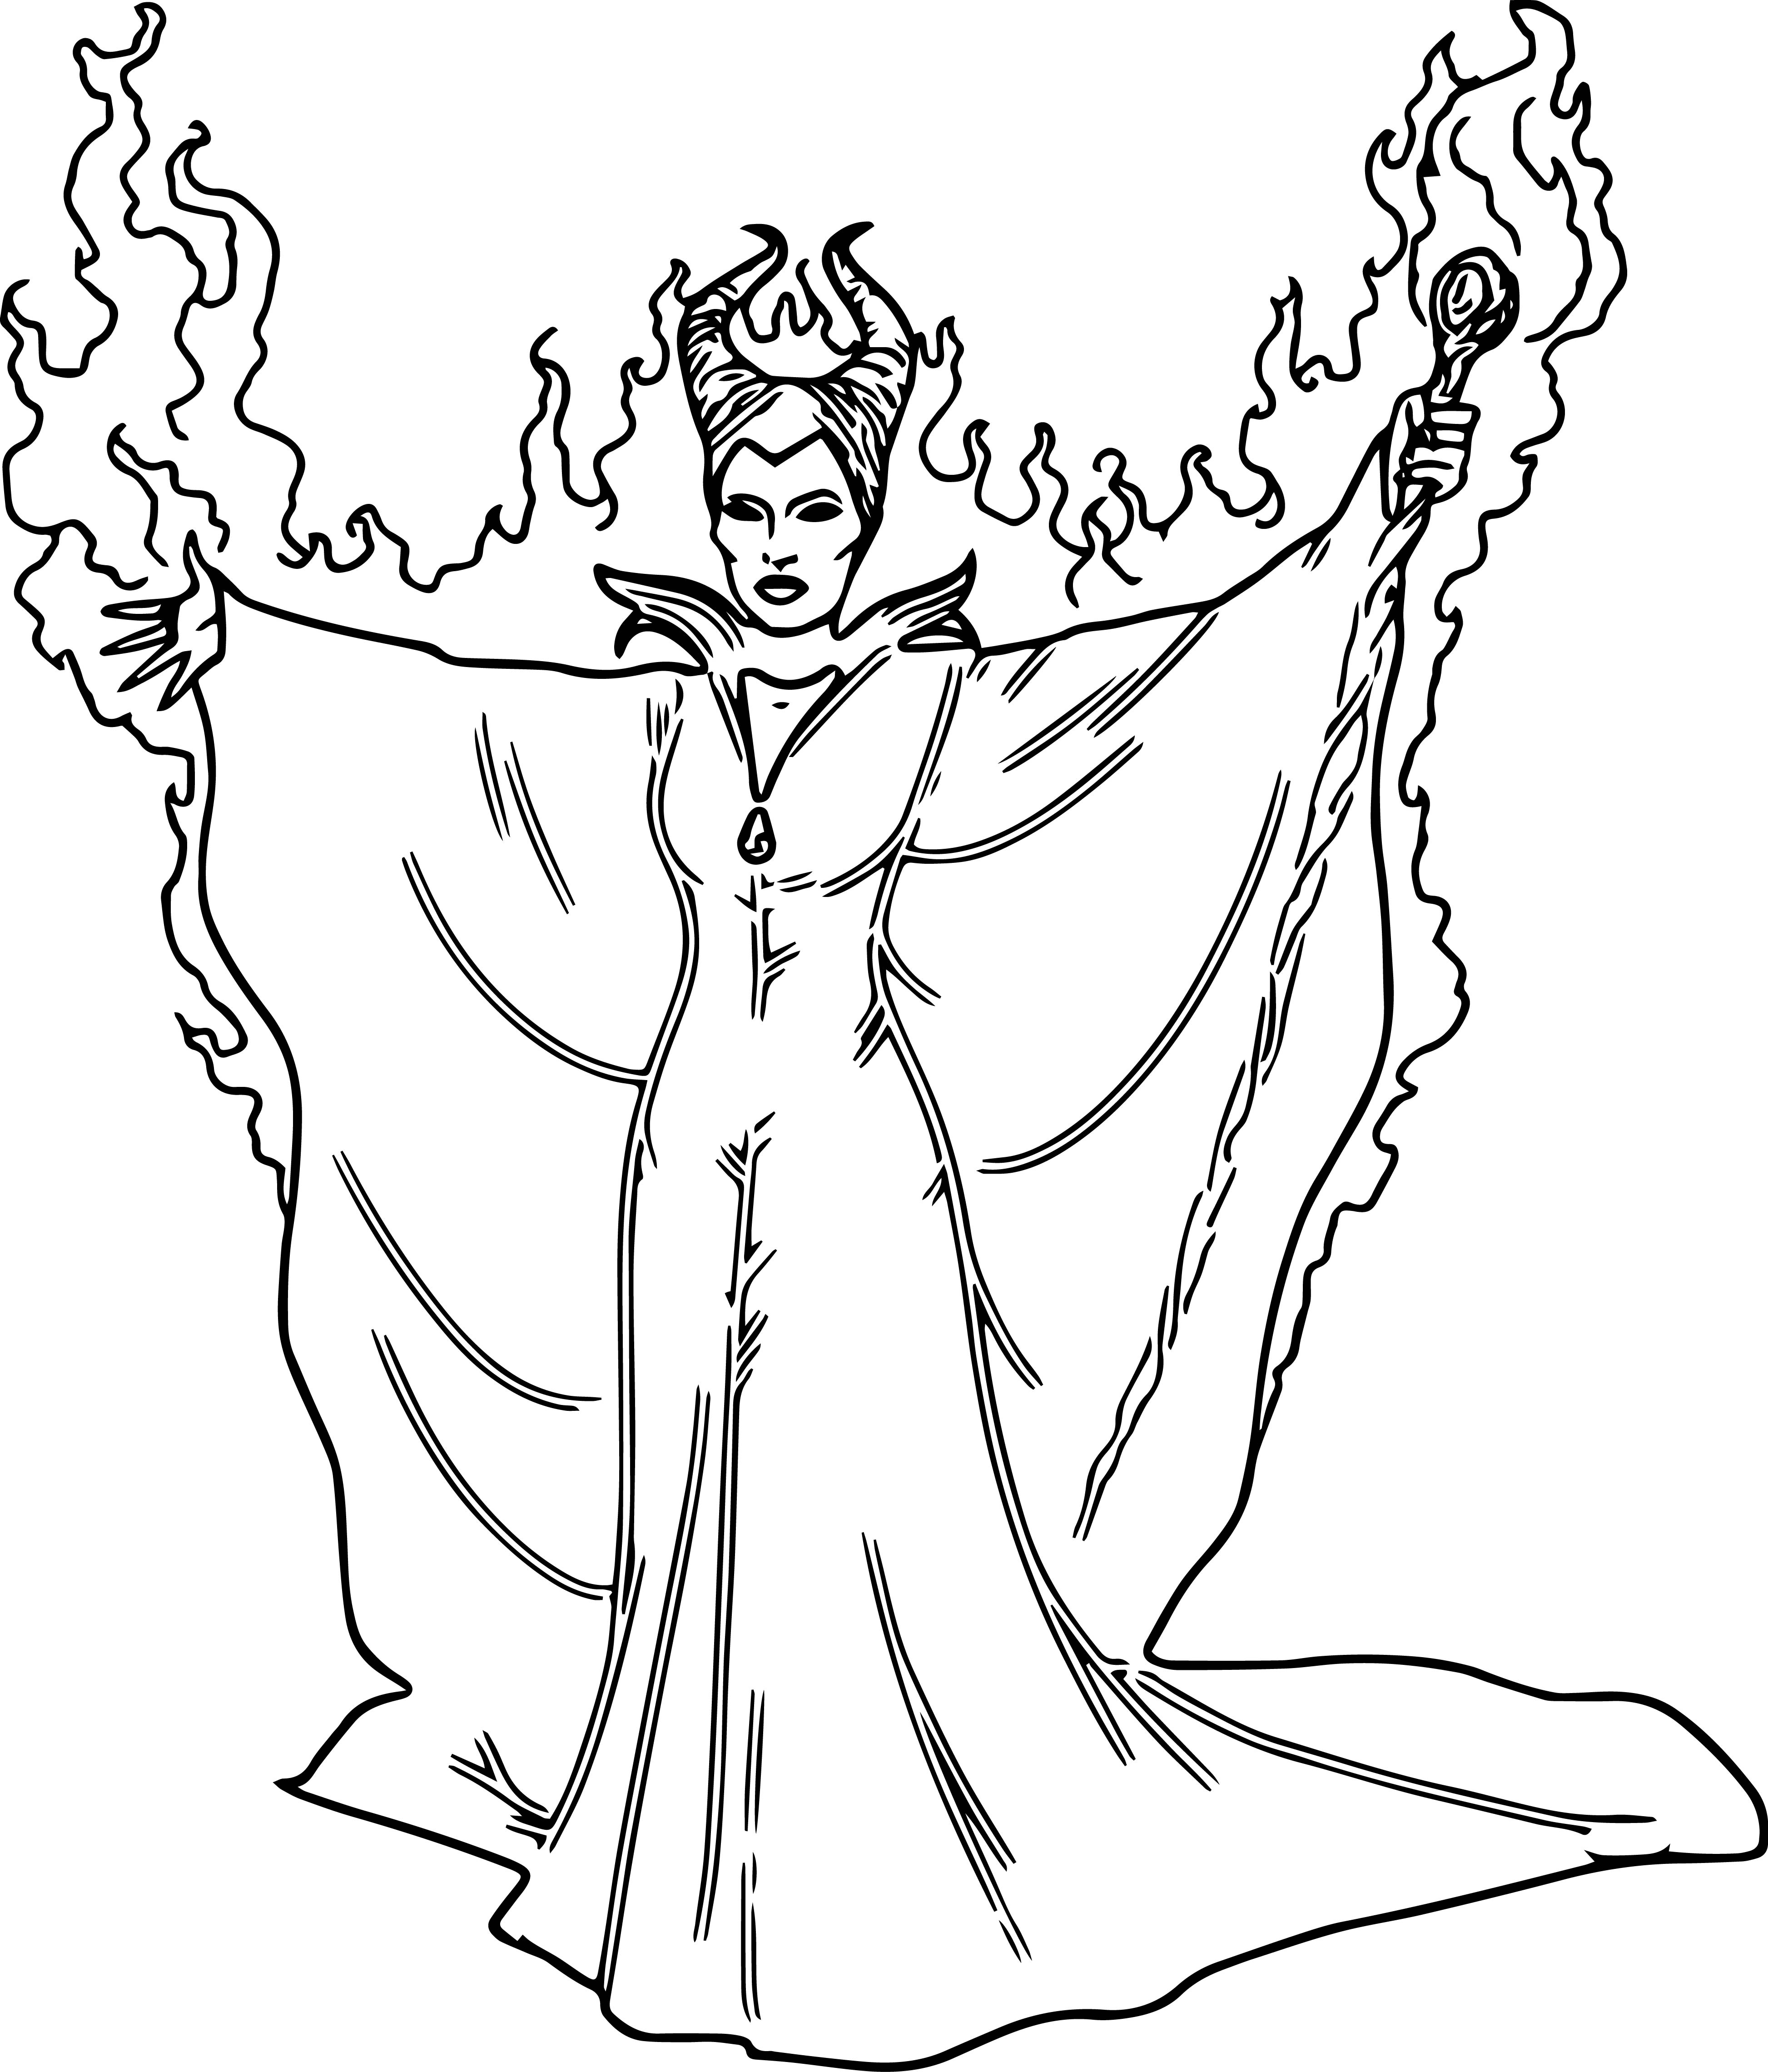 Disney Maleficent Coloring Pages | Wecoloringpage